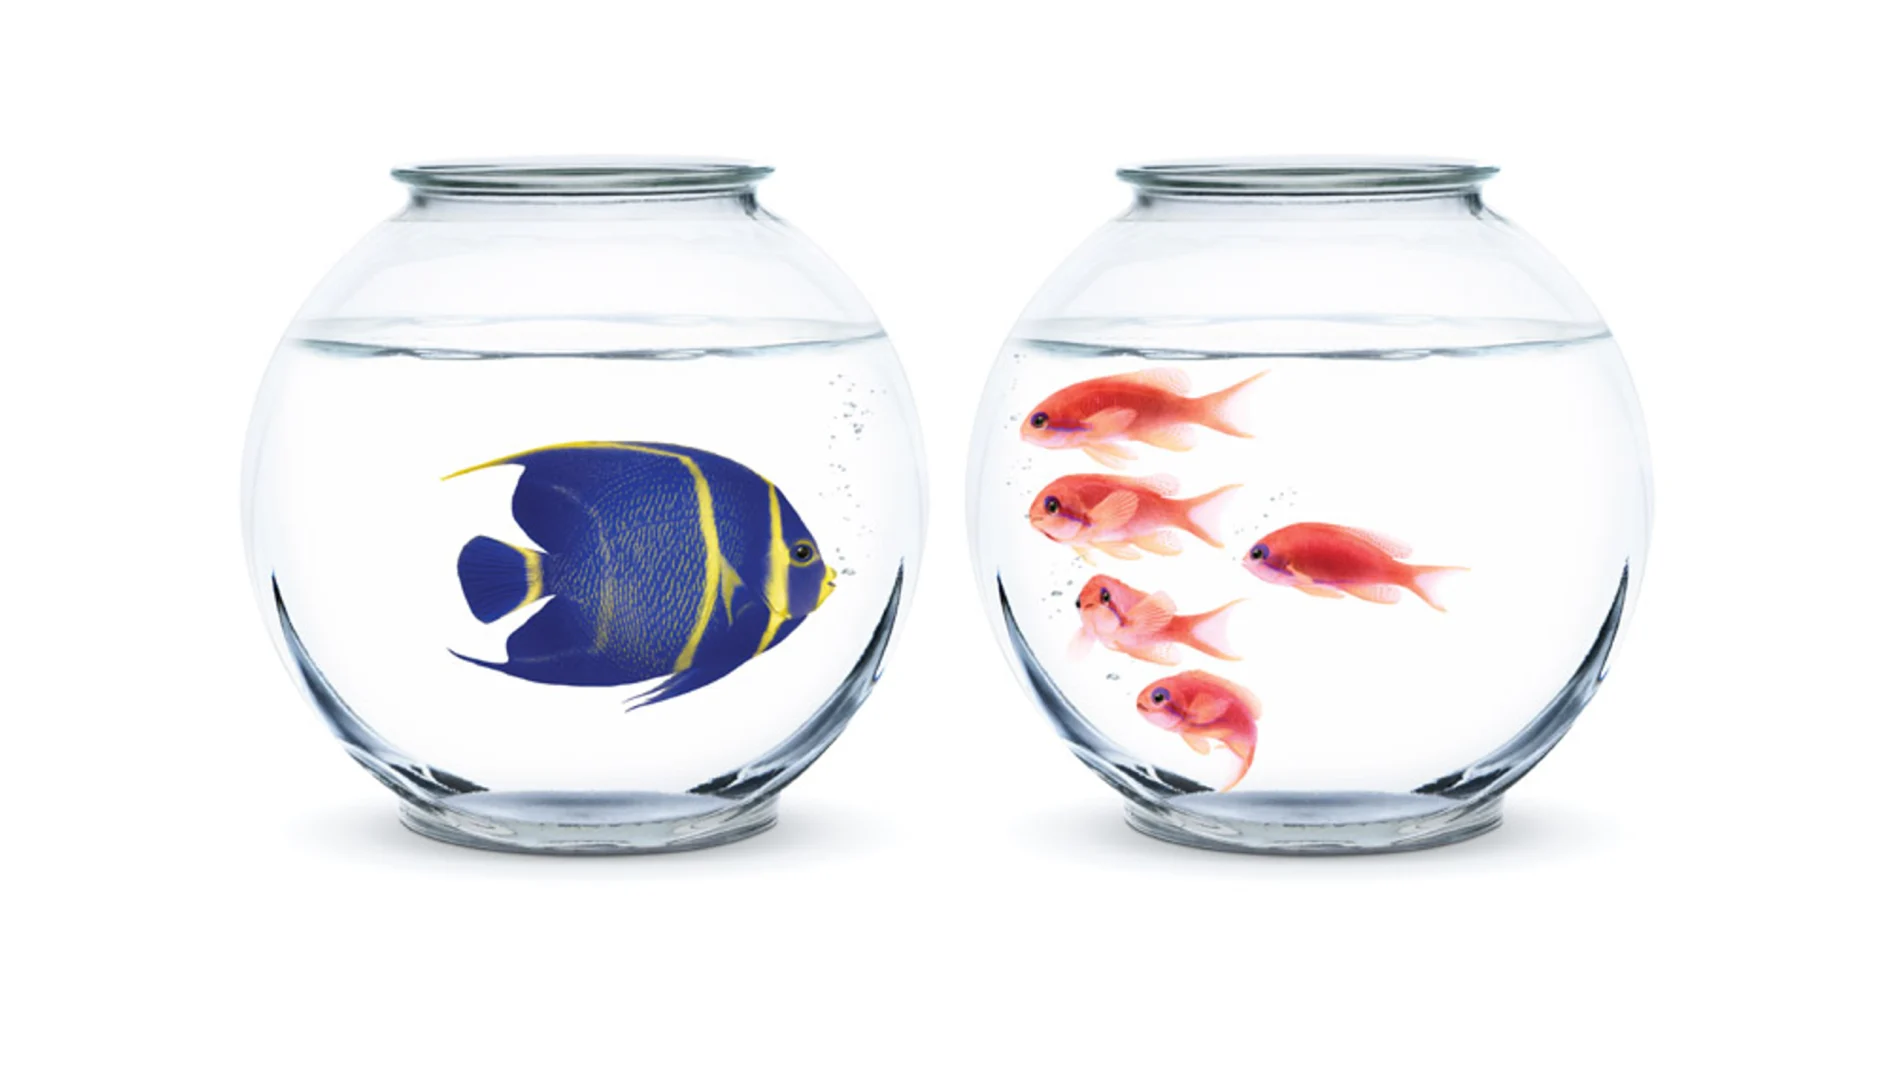 A blue fish in a fish bowl staring at five pink fish in a fish bowl next to it.